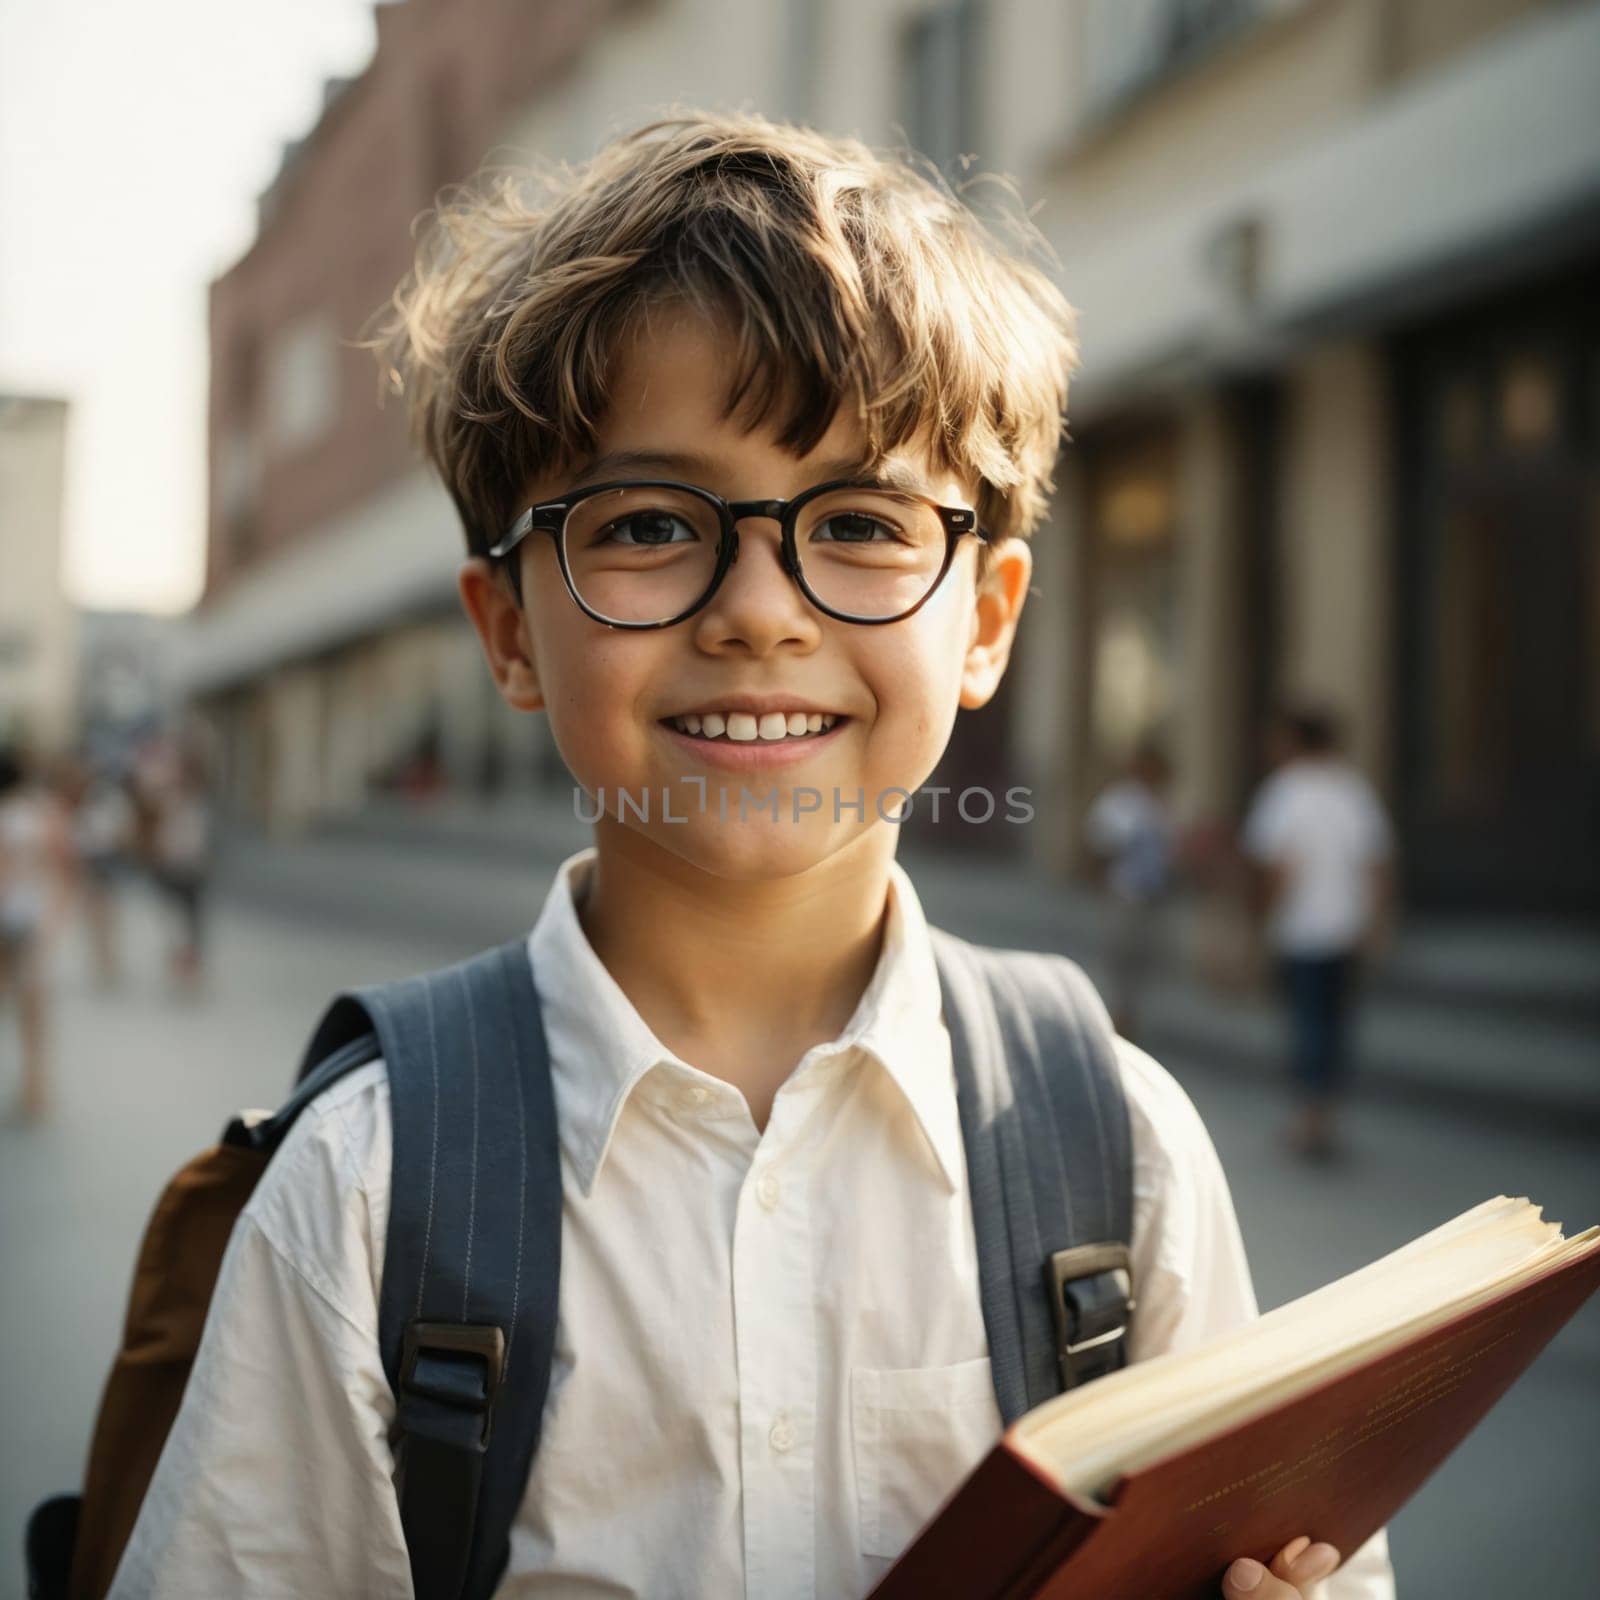 Funny smart kid with glasses, a boy from elementary school with books and a bag in a white shirt